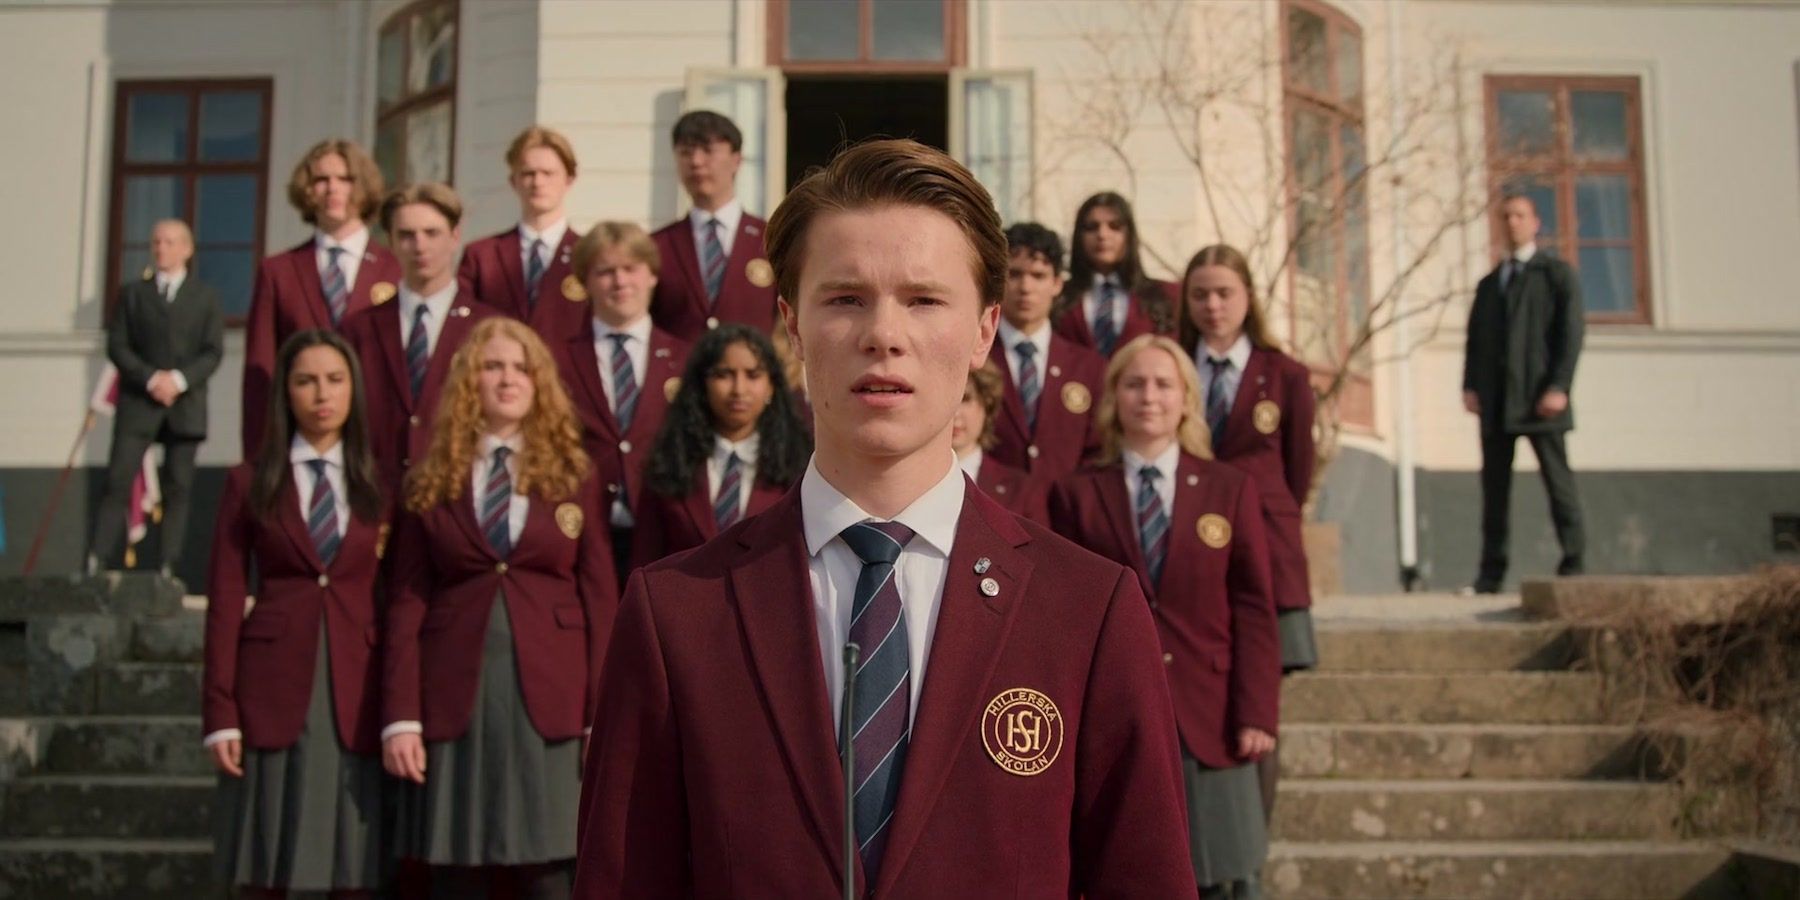 Edvin Ryding as Prince Wilhelm in Front of His Class in Young Royals Season 2